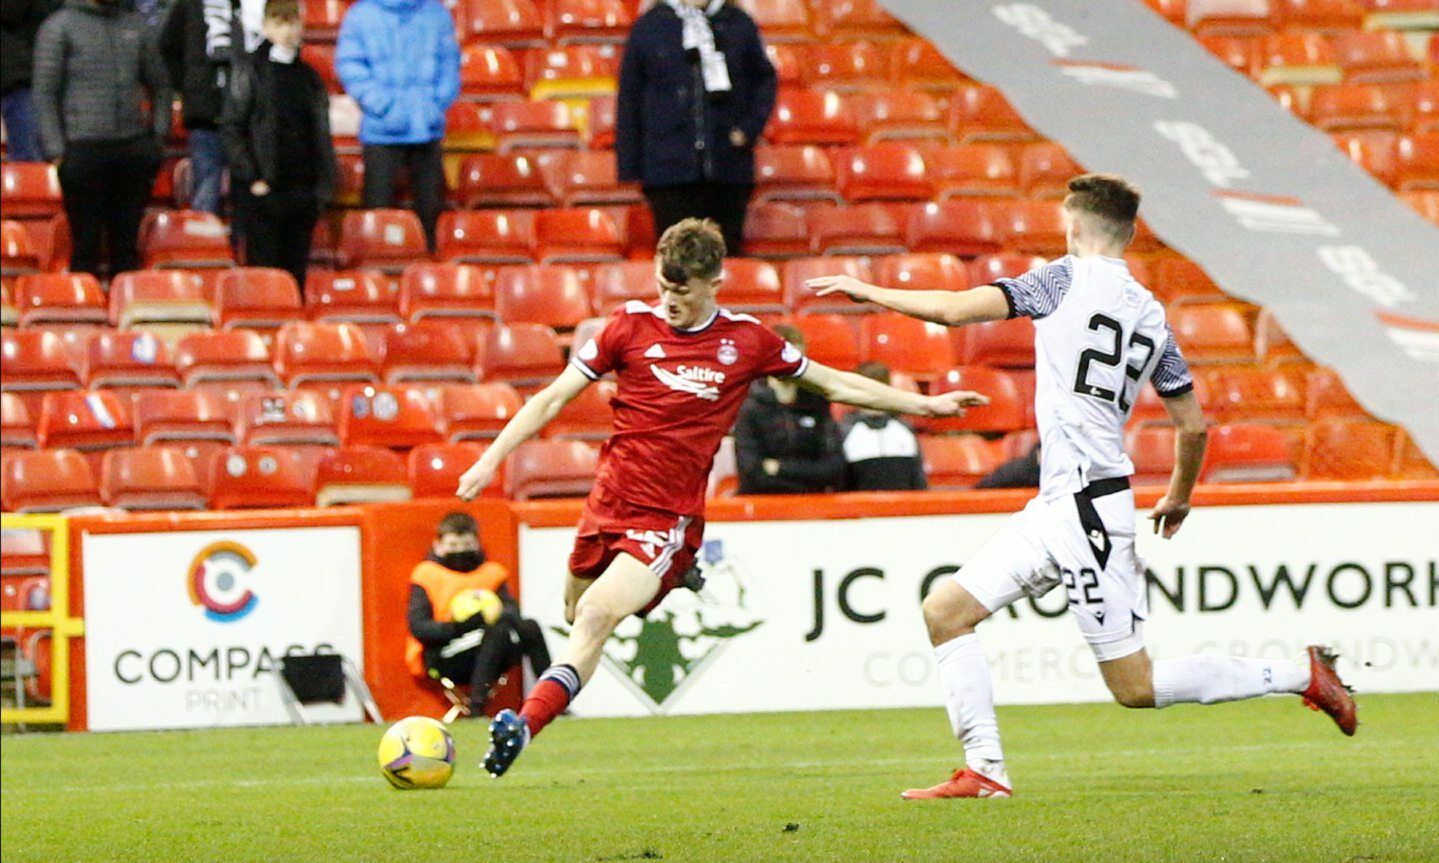 Aberdeen's Calvin Ramsay crosses against Edinburgh City in the Scottish Cup fourth round tie.